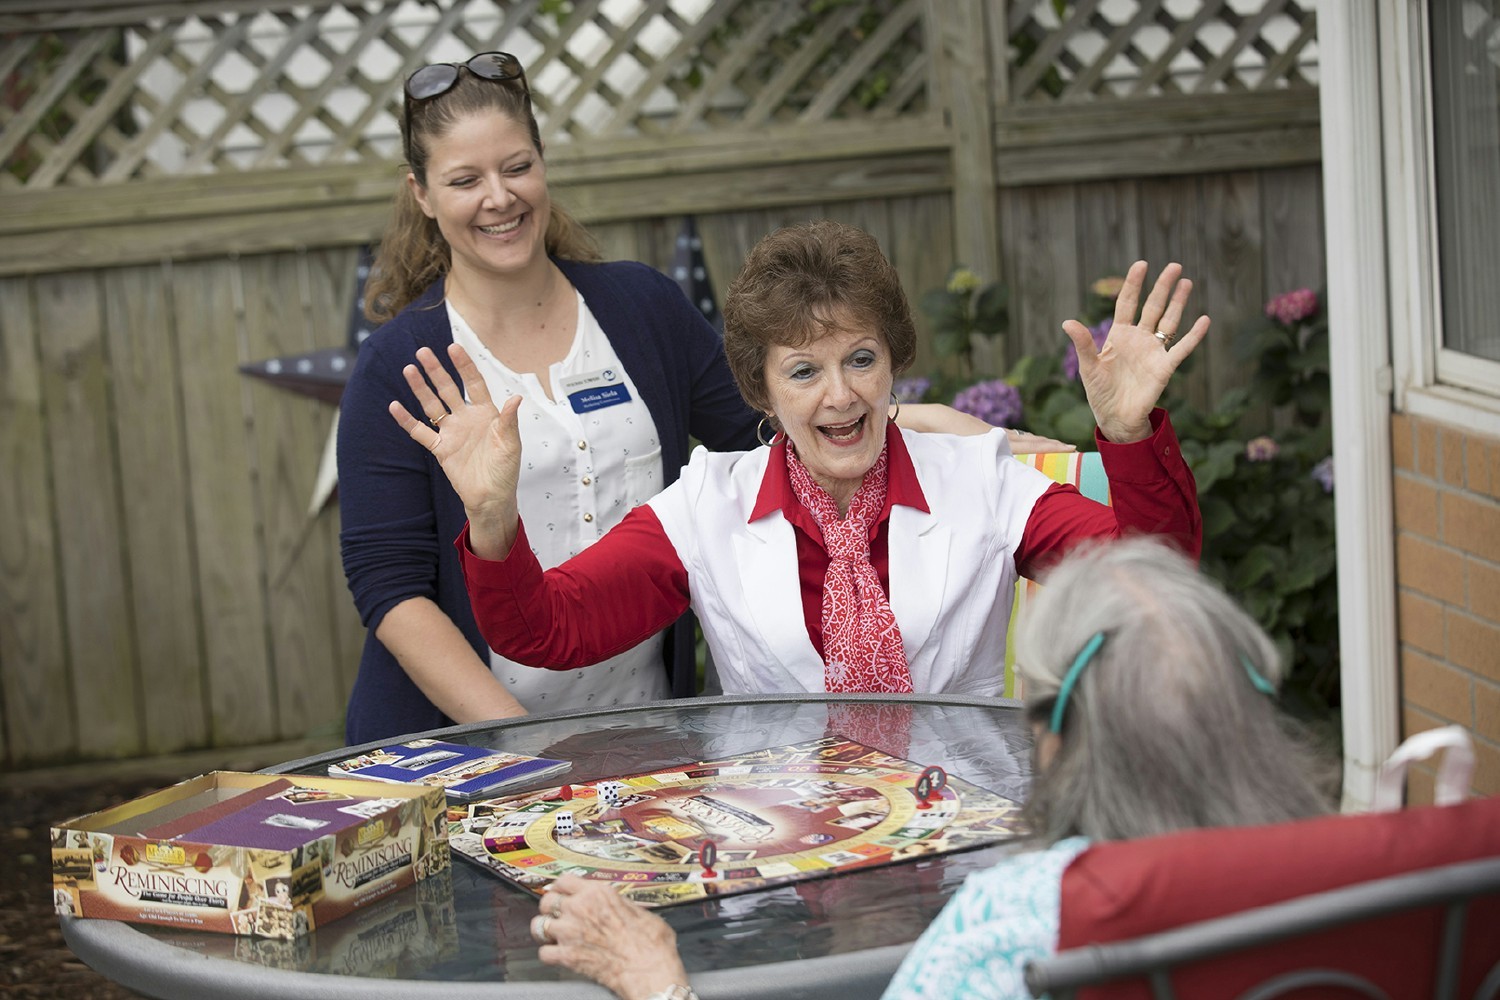 Games and having fun are a good way to connect with residents and forge deep relationships.